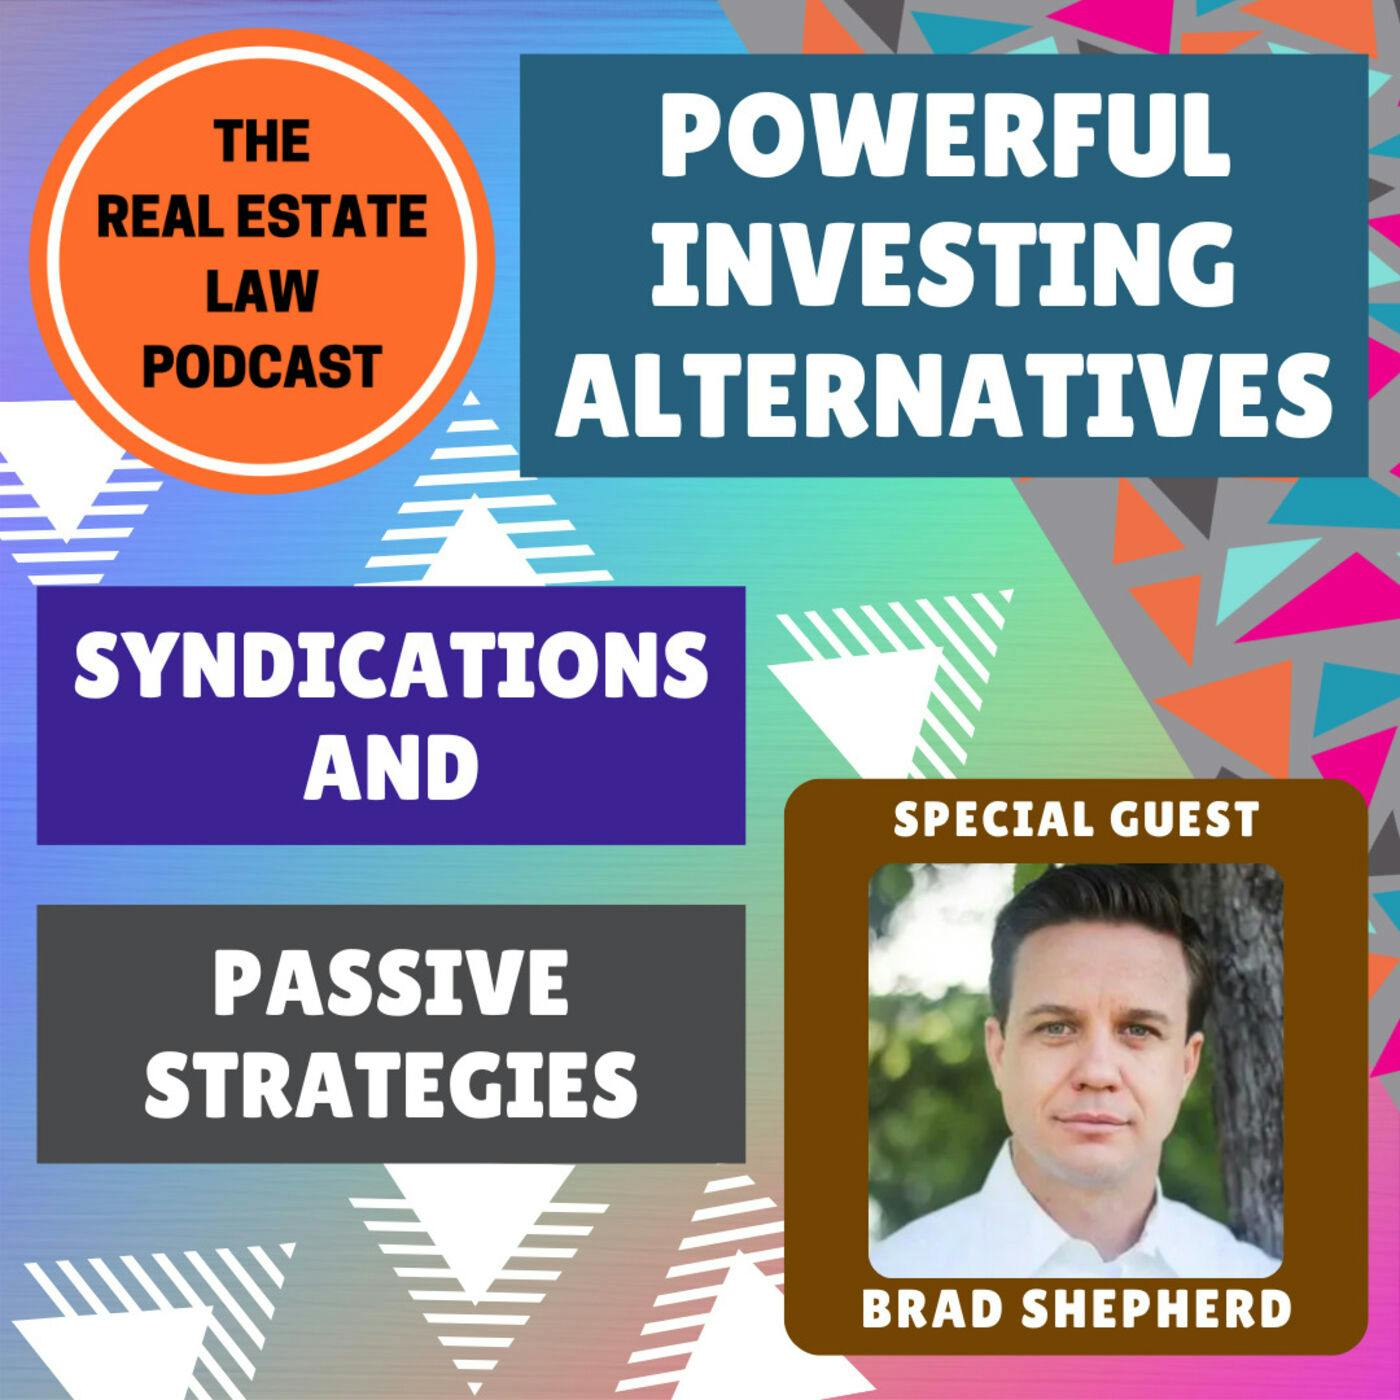 Powerful Investing Alternatives - Syndications and Passive Strategies with Brad Shepherd